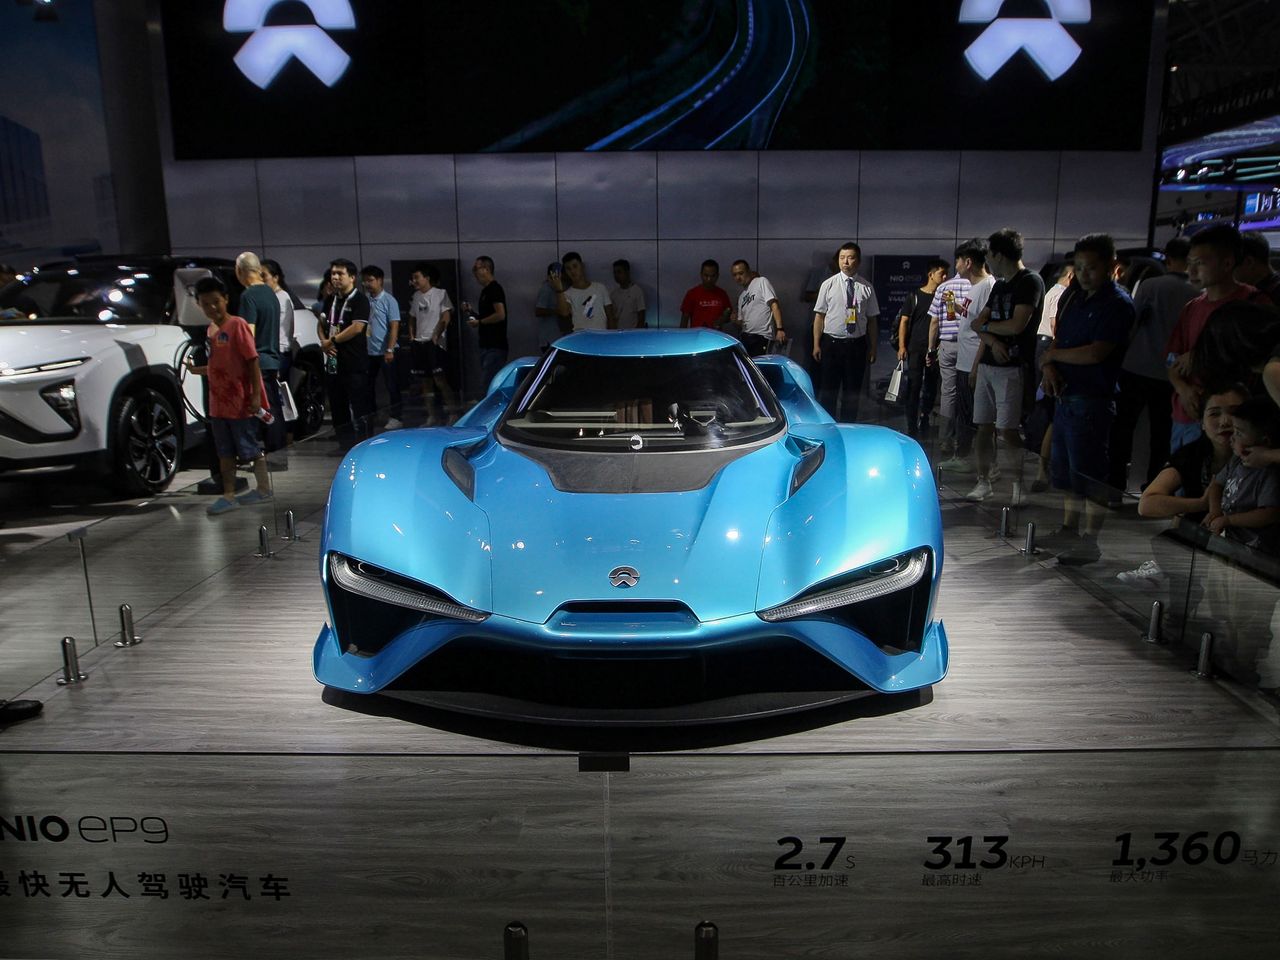 Nio The Chinese Electric Car Company Chinosity